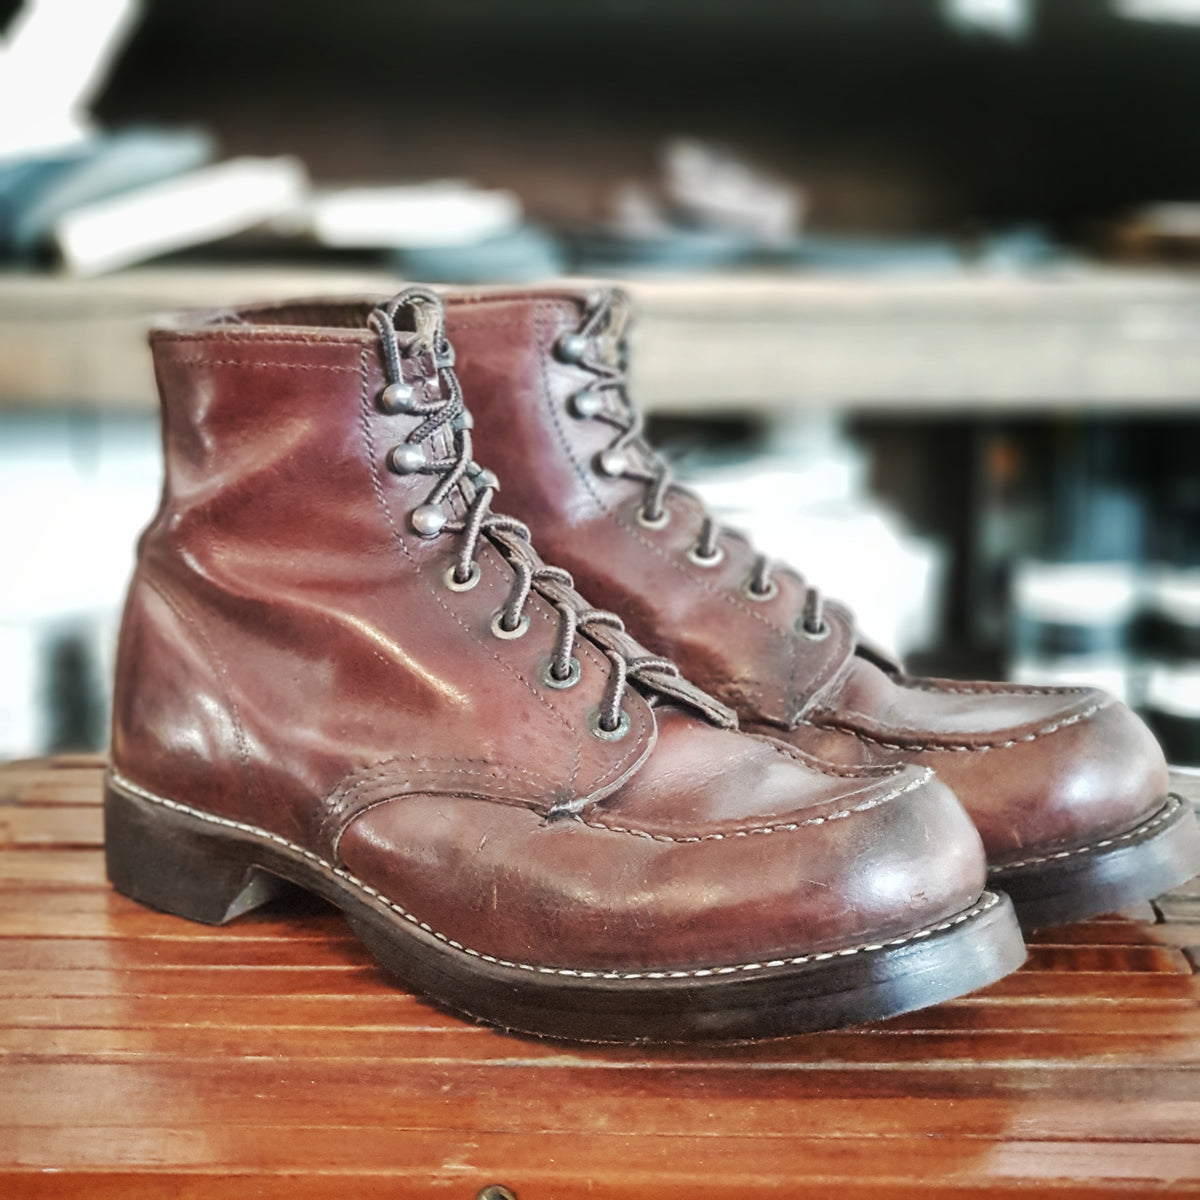 red wing moc toe resole